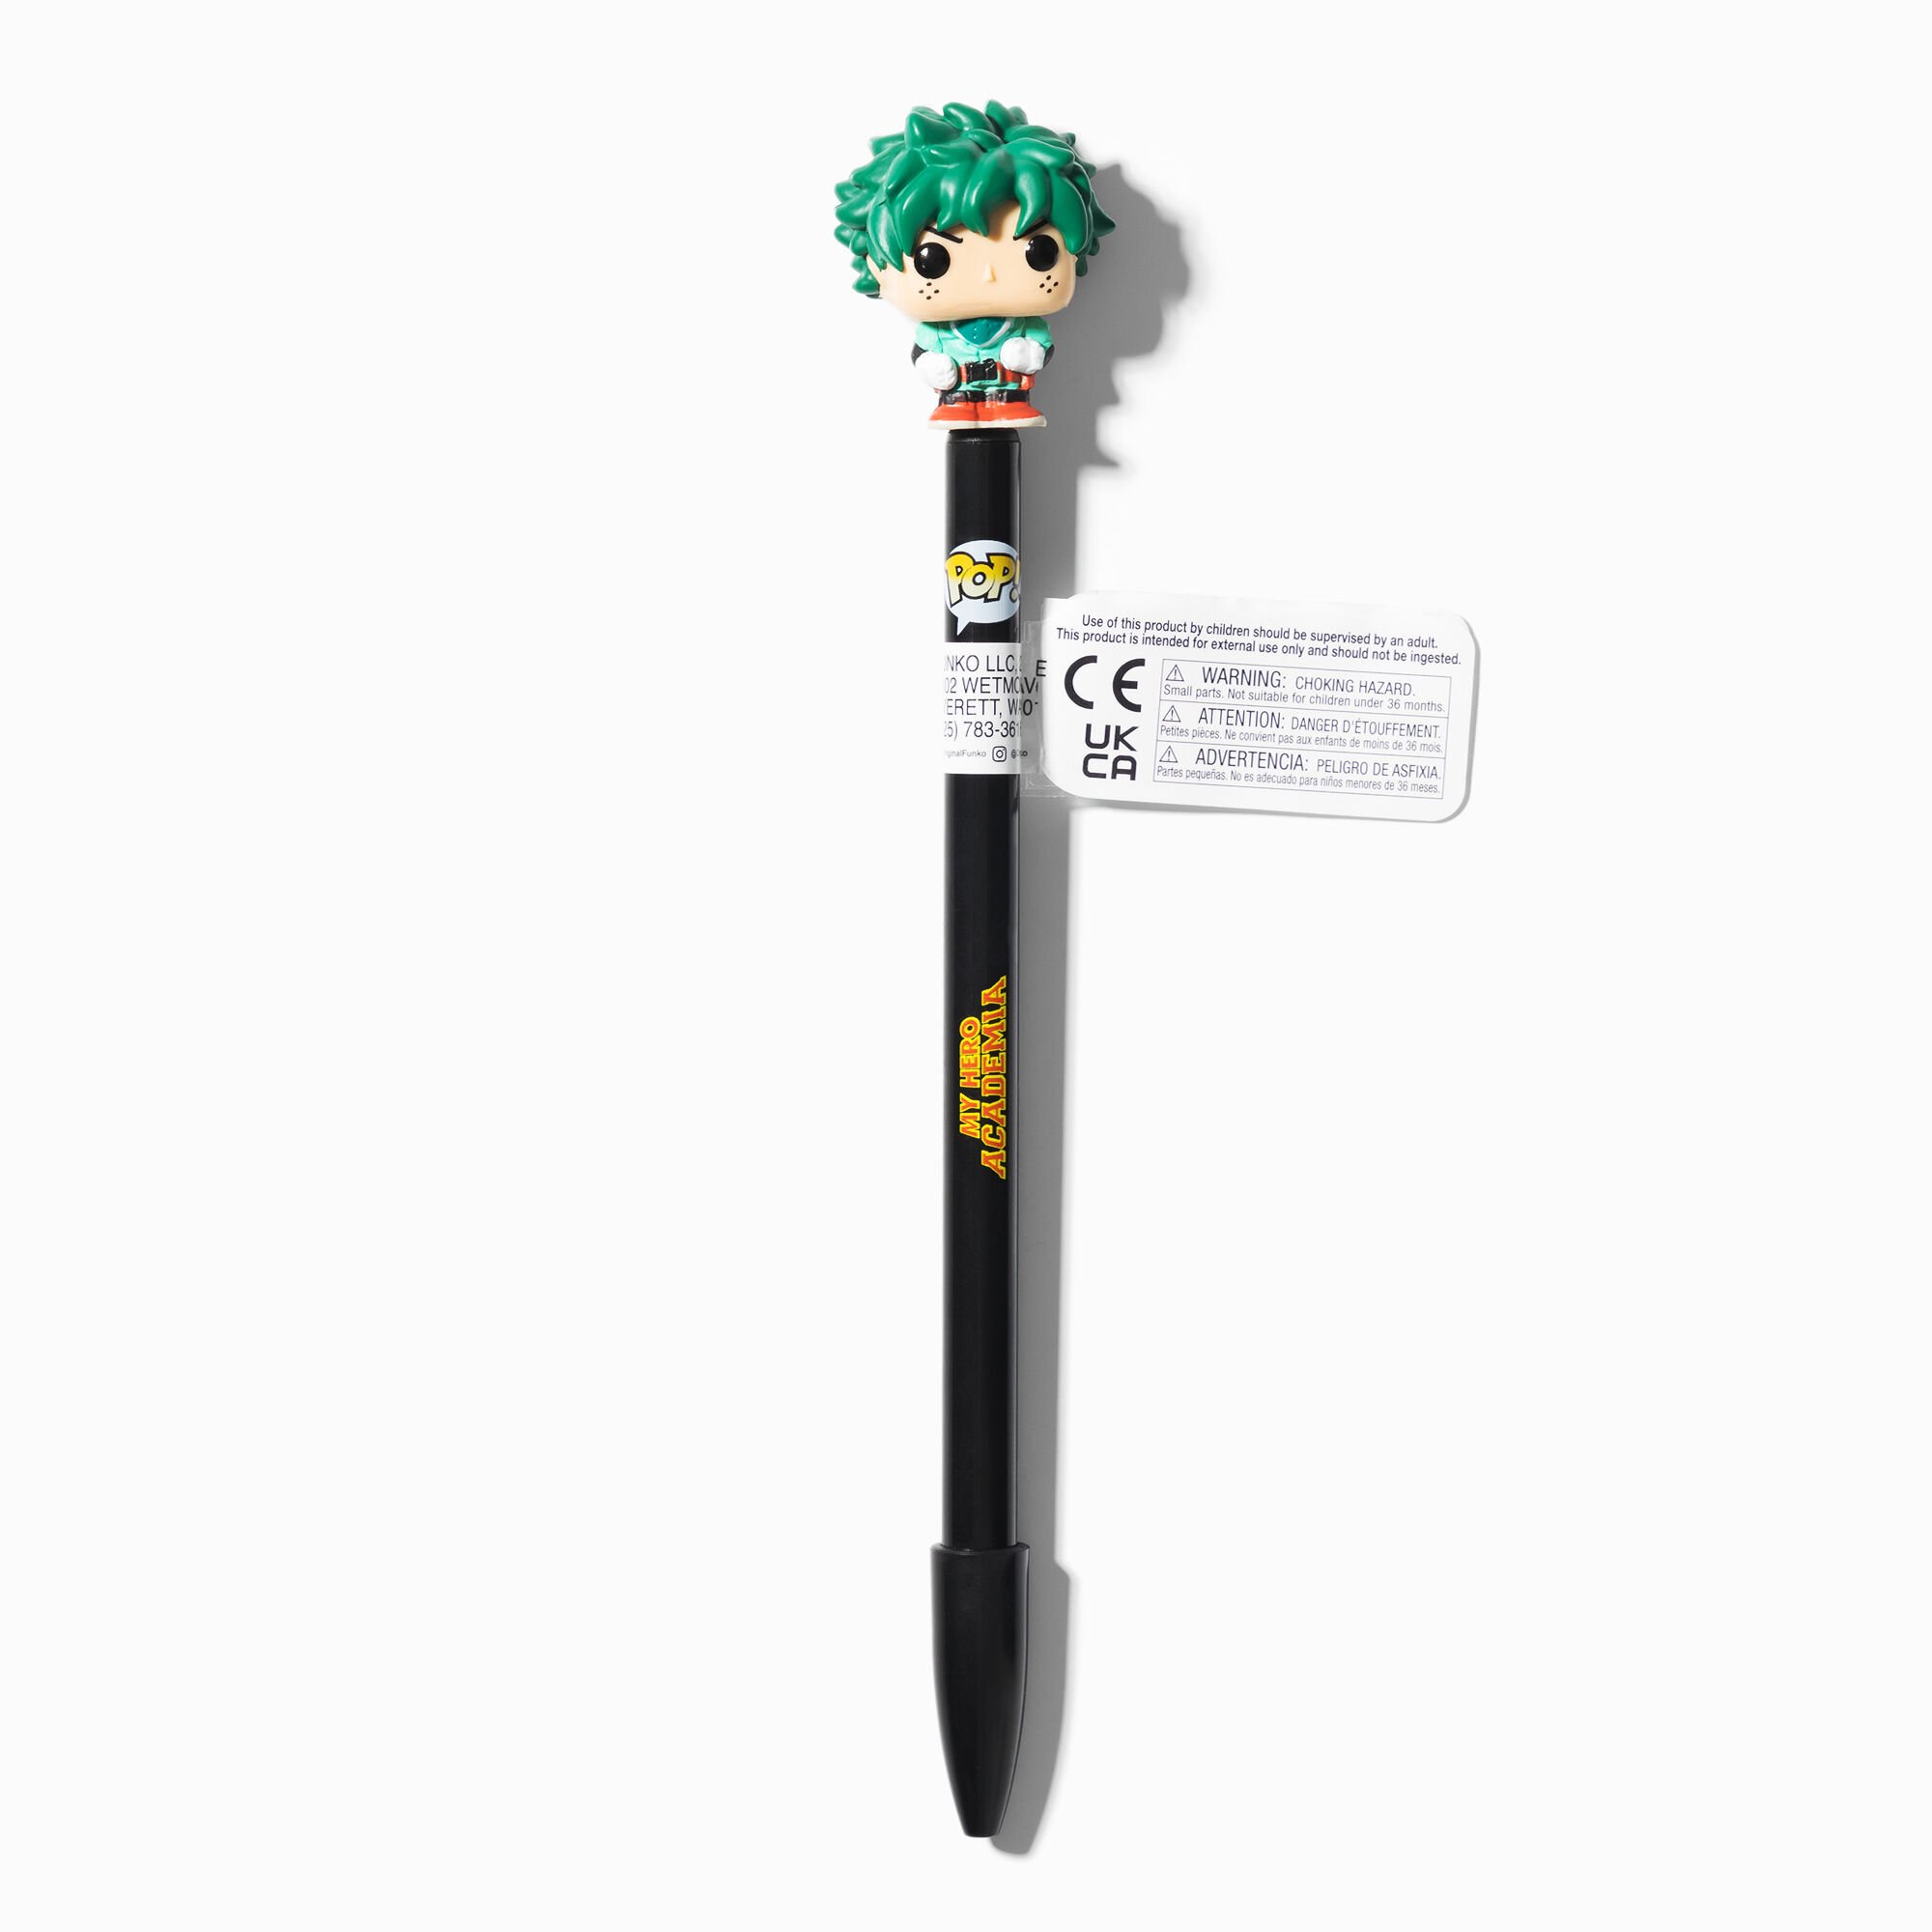 View Claires My Hero Academia Pop Pen Styles May Vary information